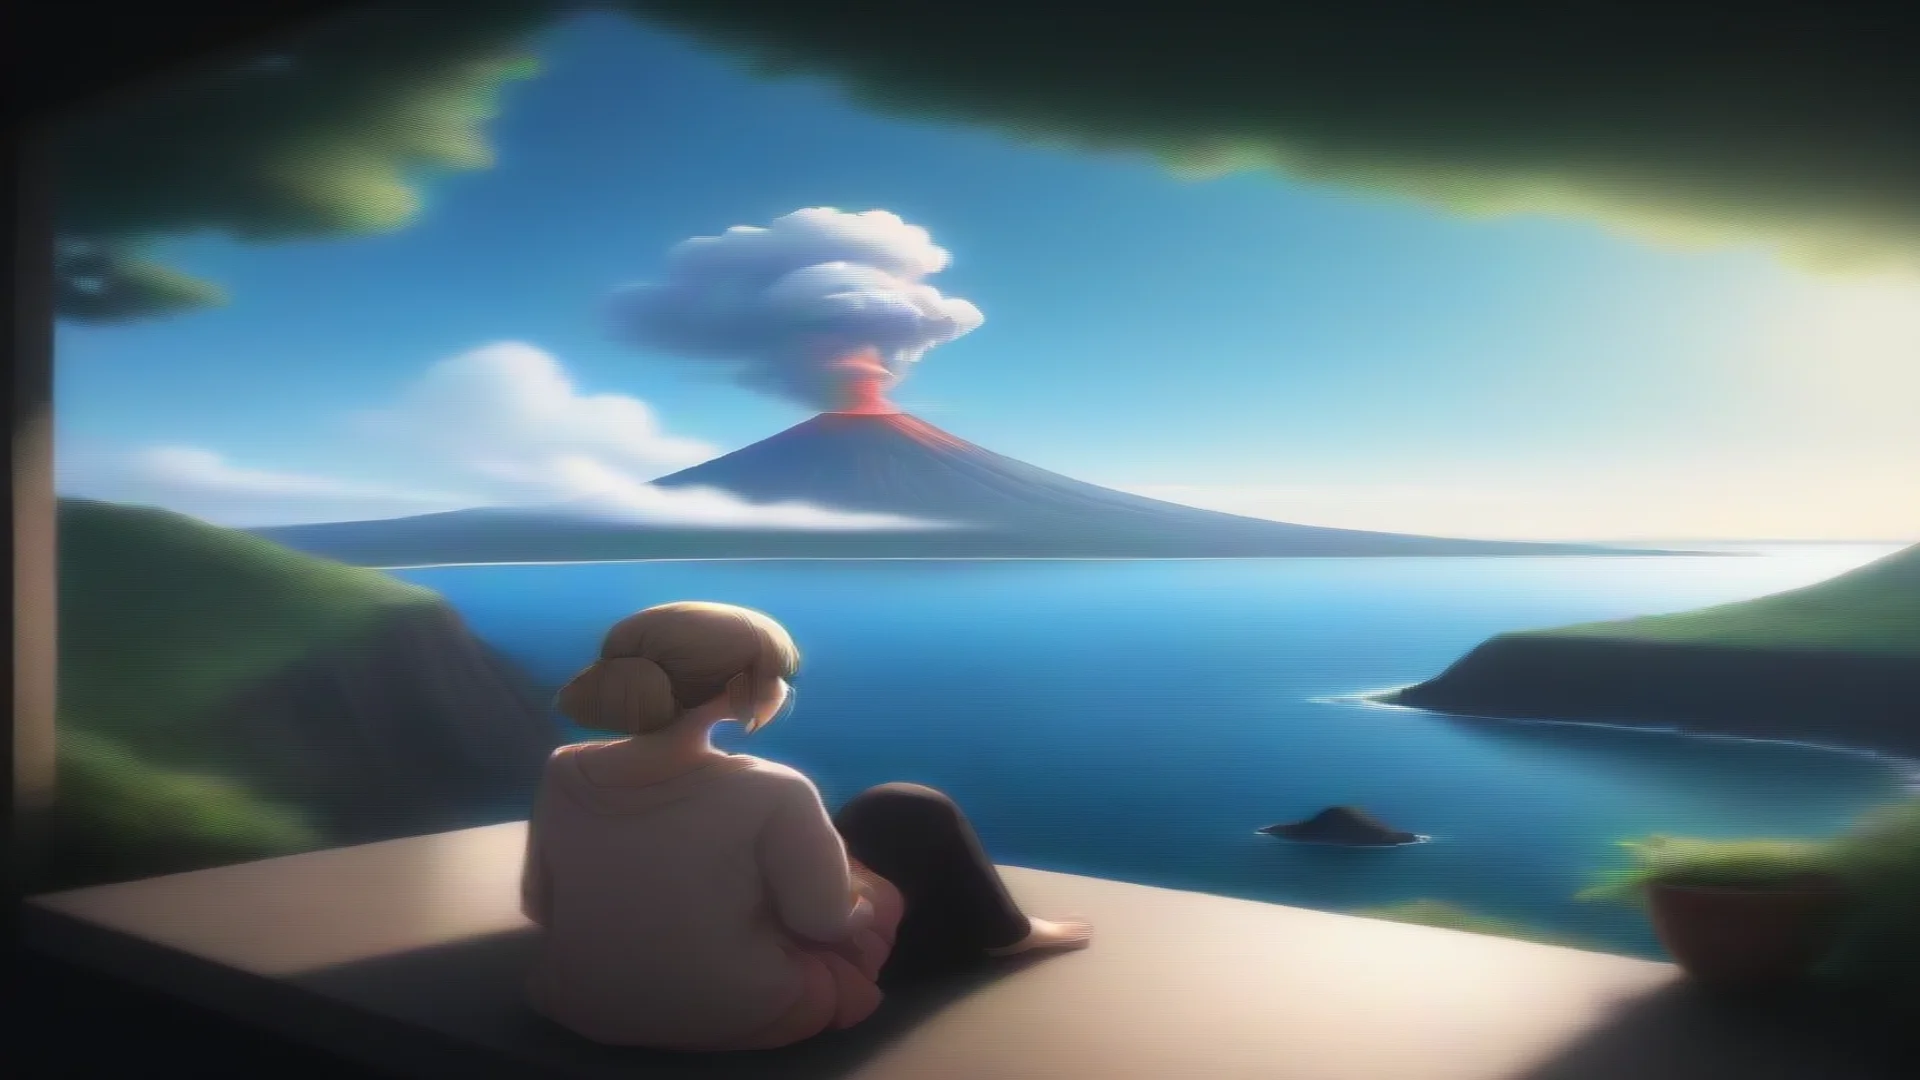 airelaxing anime scene serene lookout over ocean with volcano lovely wide